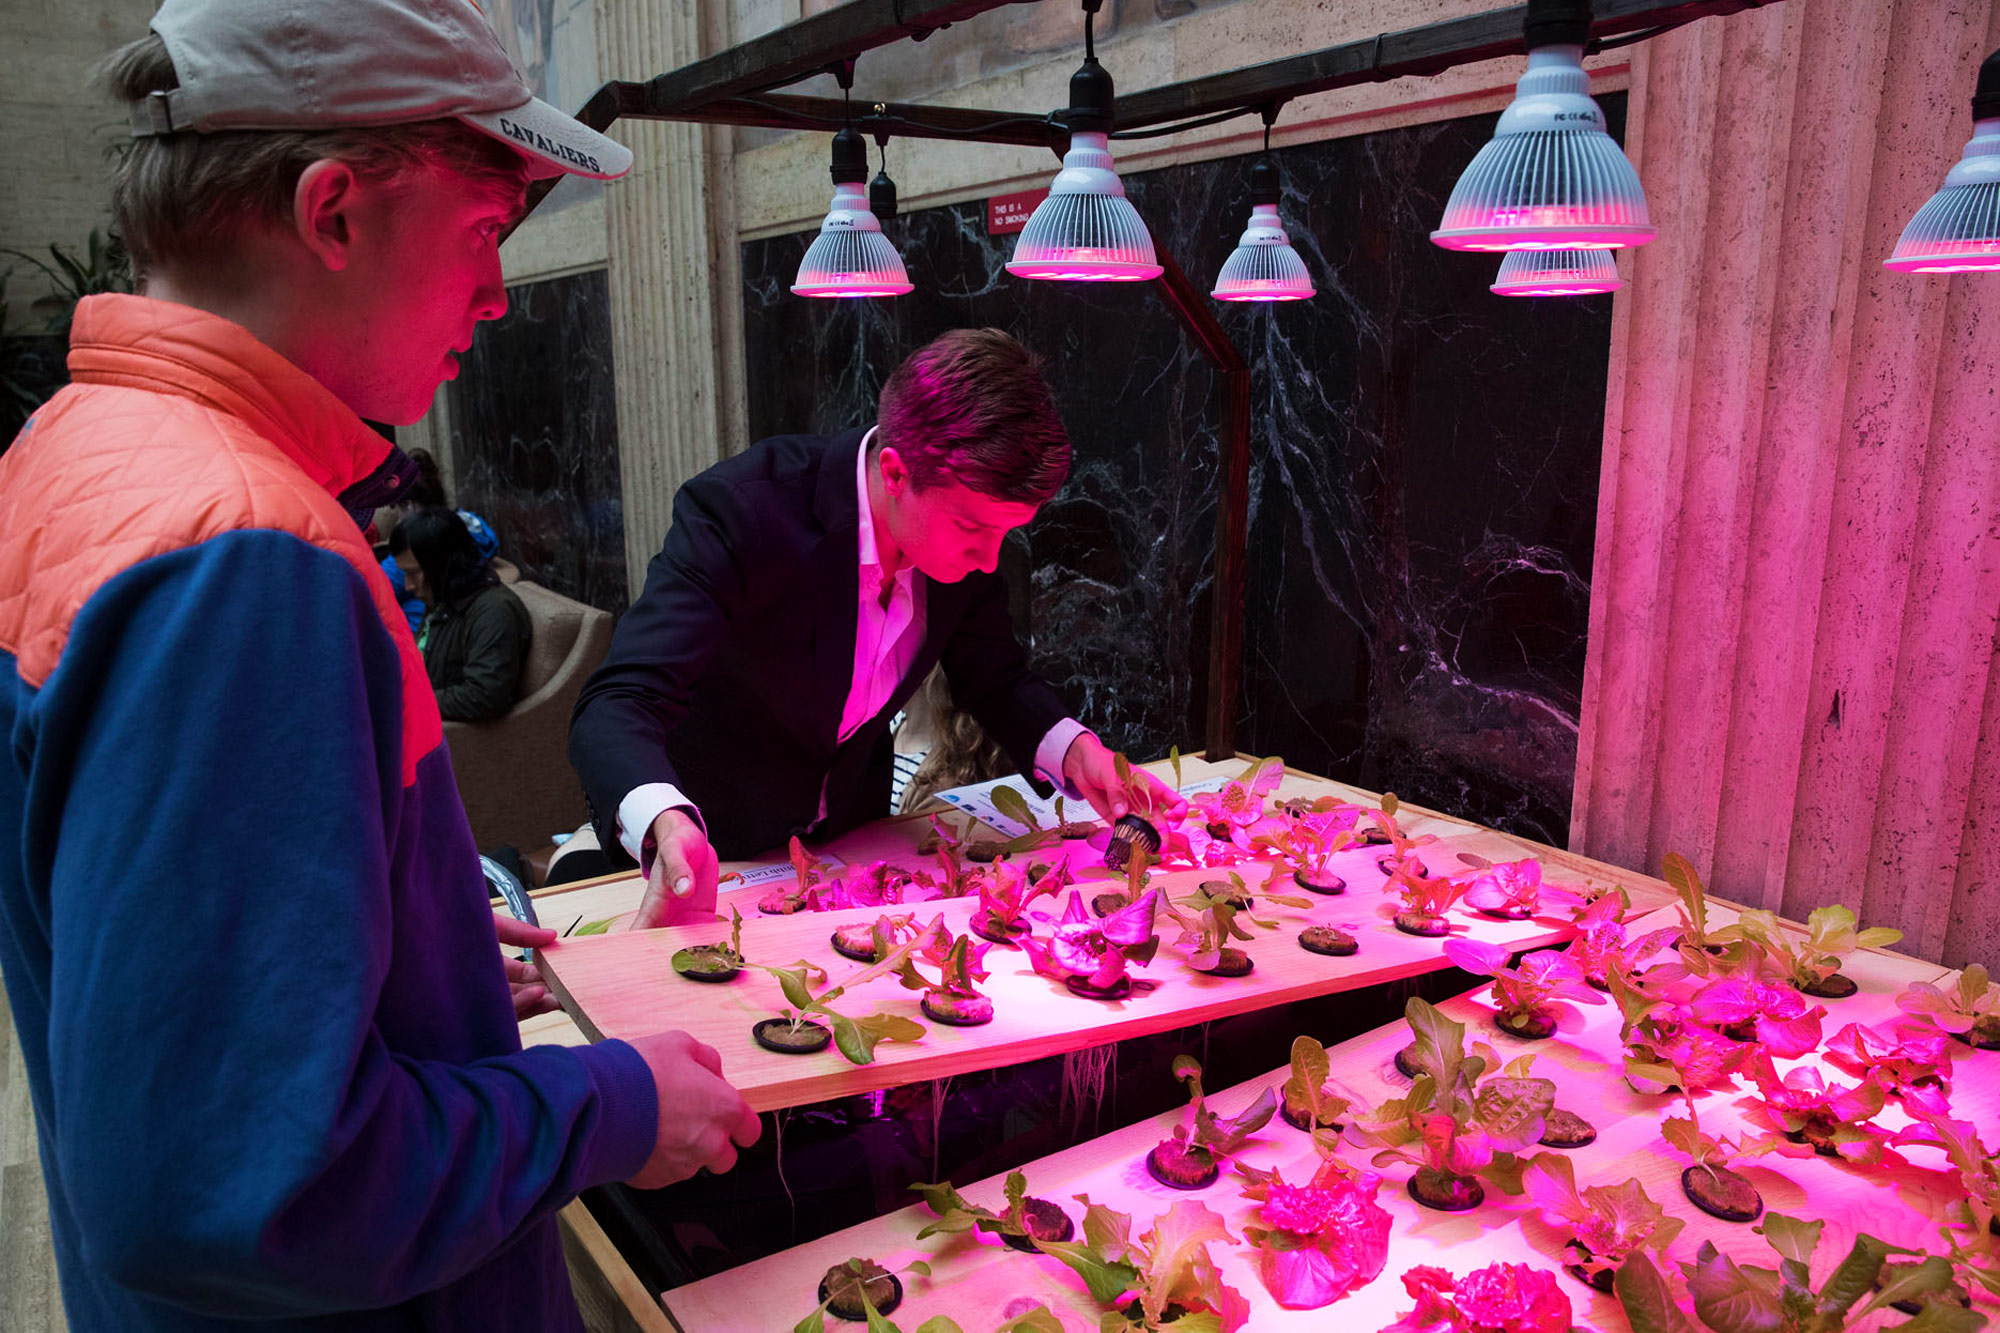 Alexander Olesen, founder of Babylon Micro-Farms, hopes that his hydroponic systems will soon be put to use in UVA dining halls and low-income areas. (Photo by Dan Addison, University Communications)